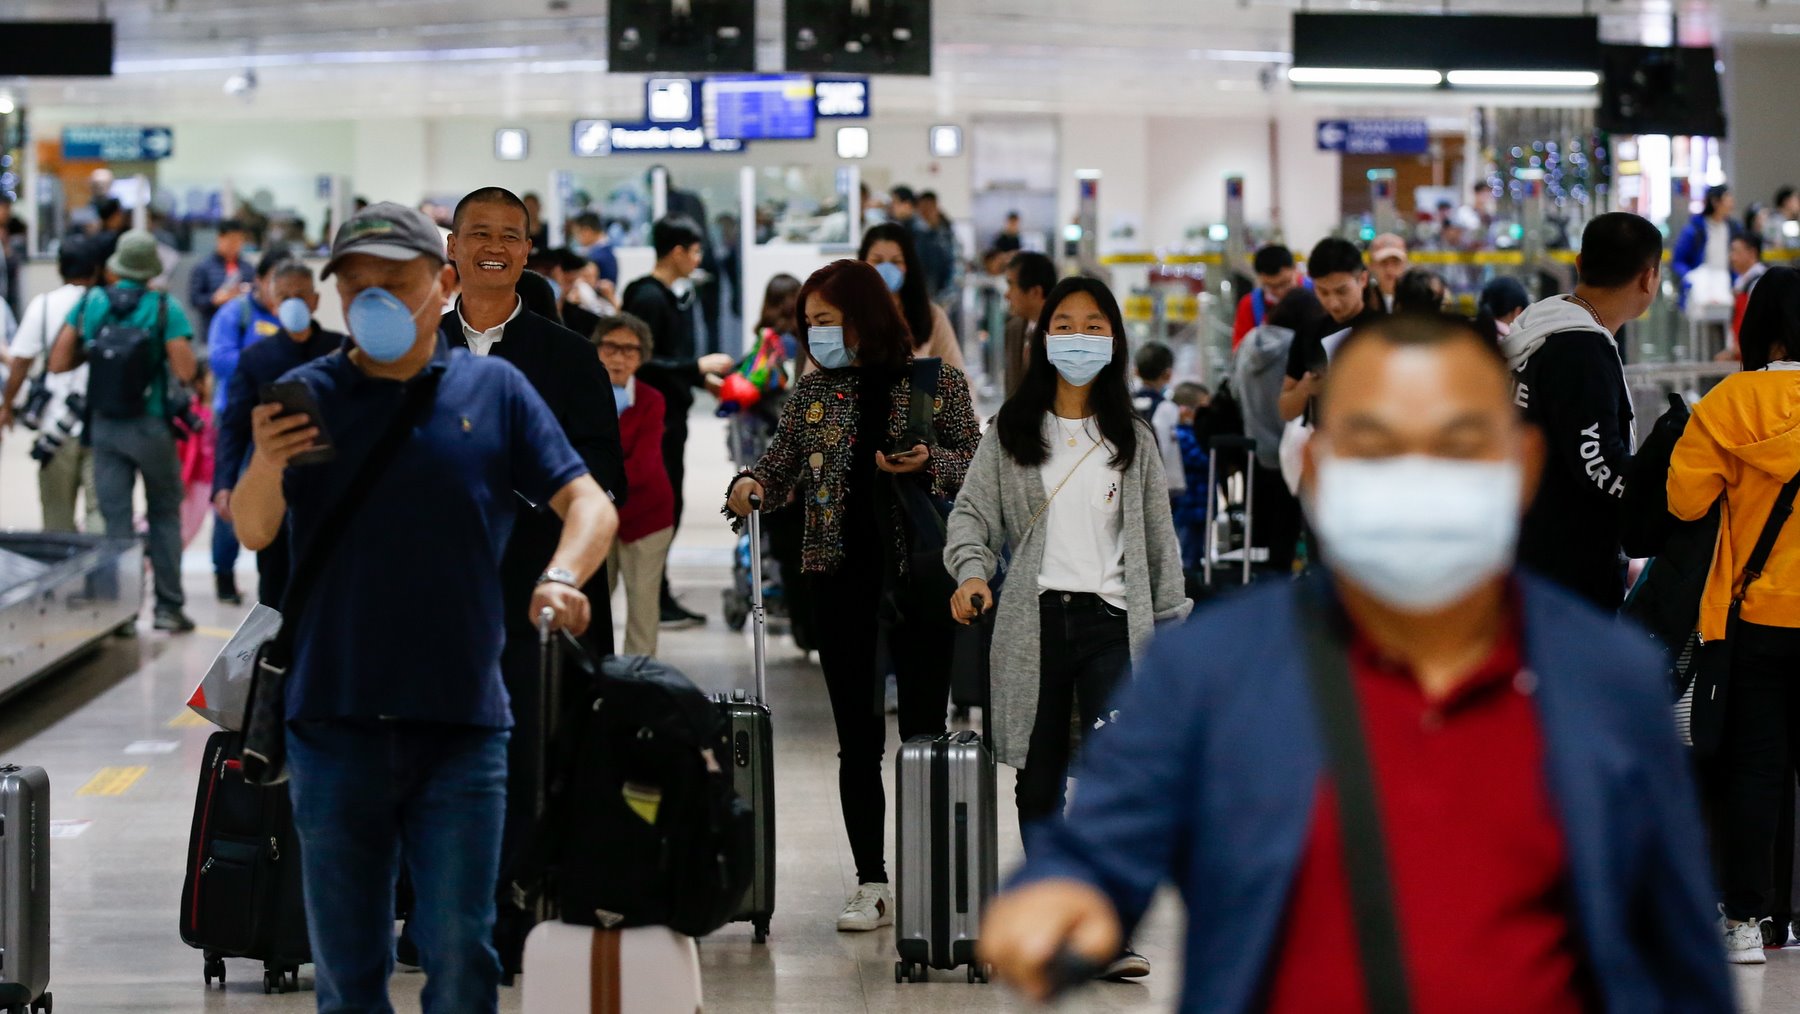 Passengers wearing face masks who arrived from Guangzhou, China prepare to exit the airport at Manila, Philippines, 22 January 2020. EPA/MARK R. CRISTINO